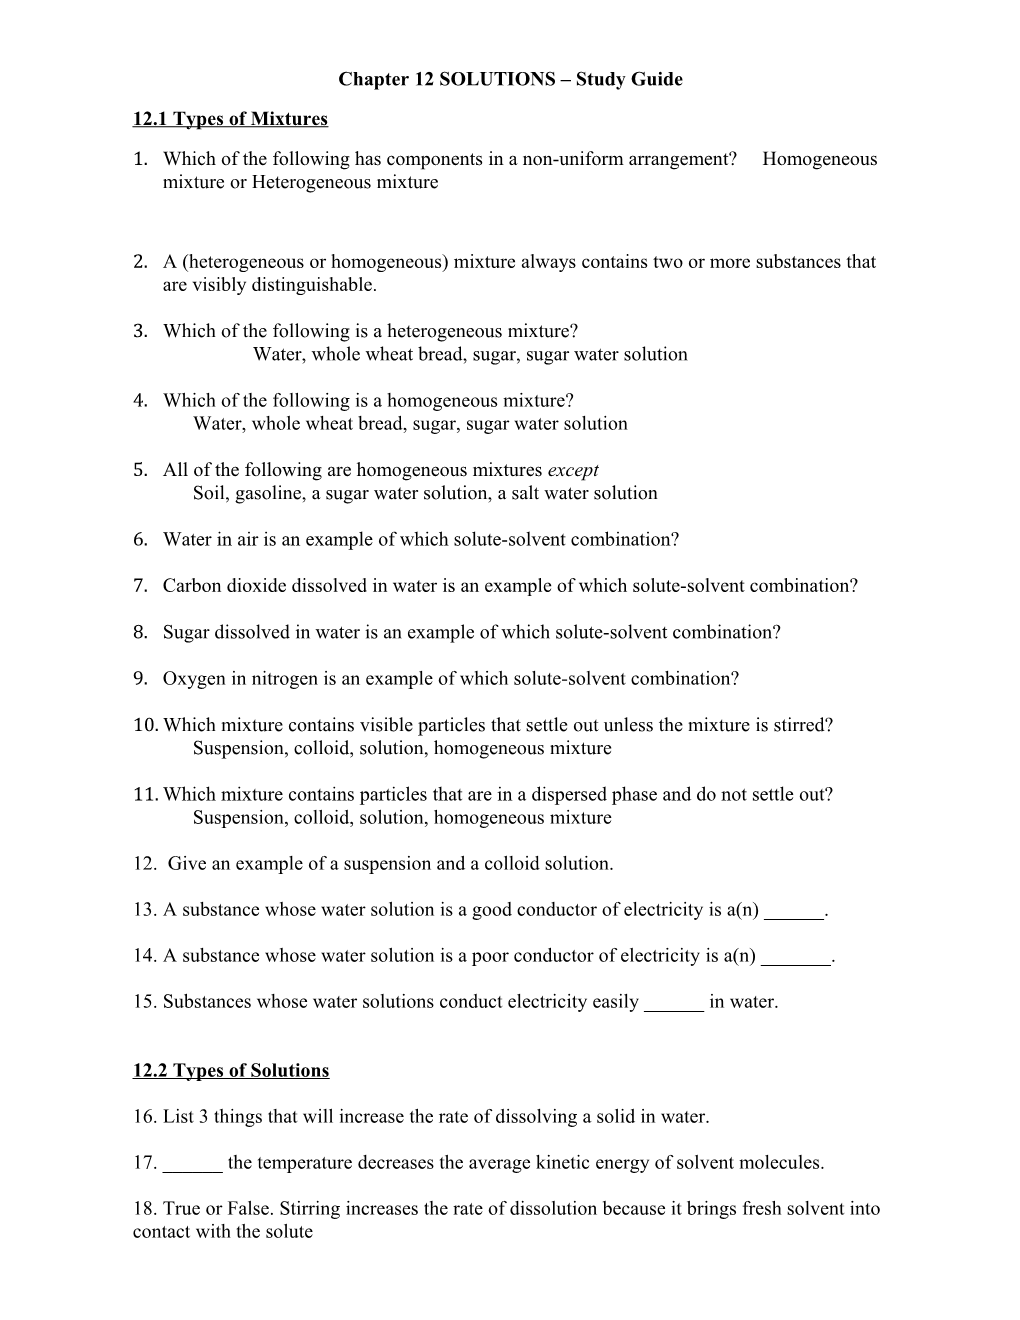 Chapter 12 SOLUTIONS Study Guide